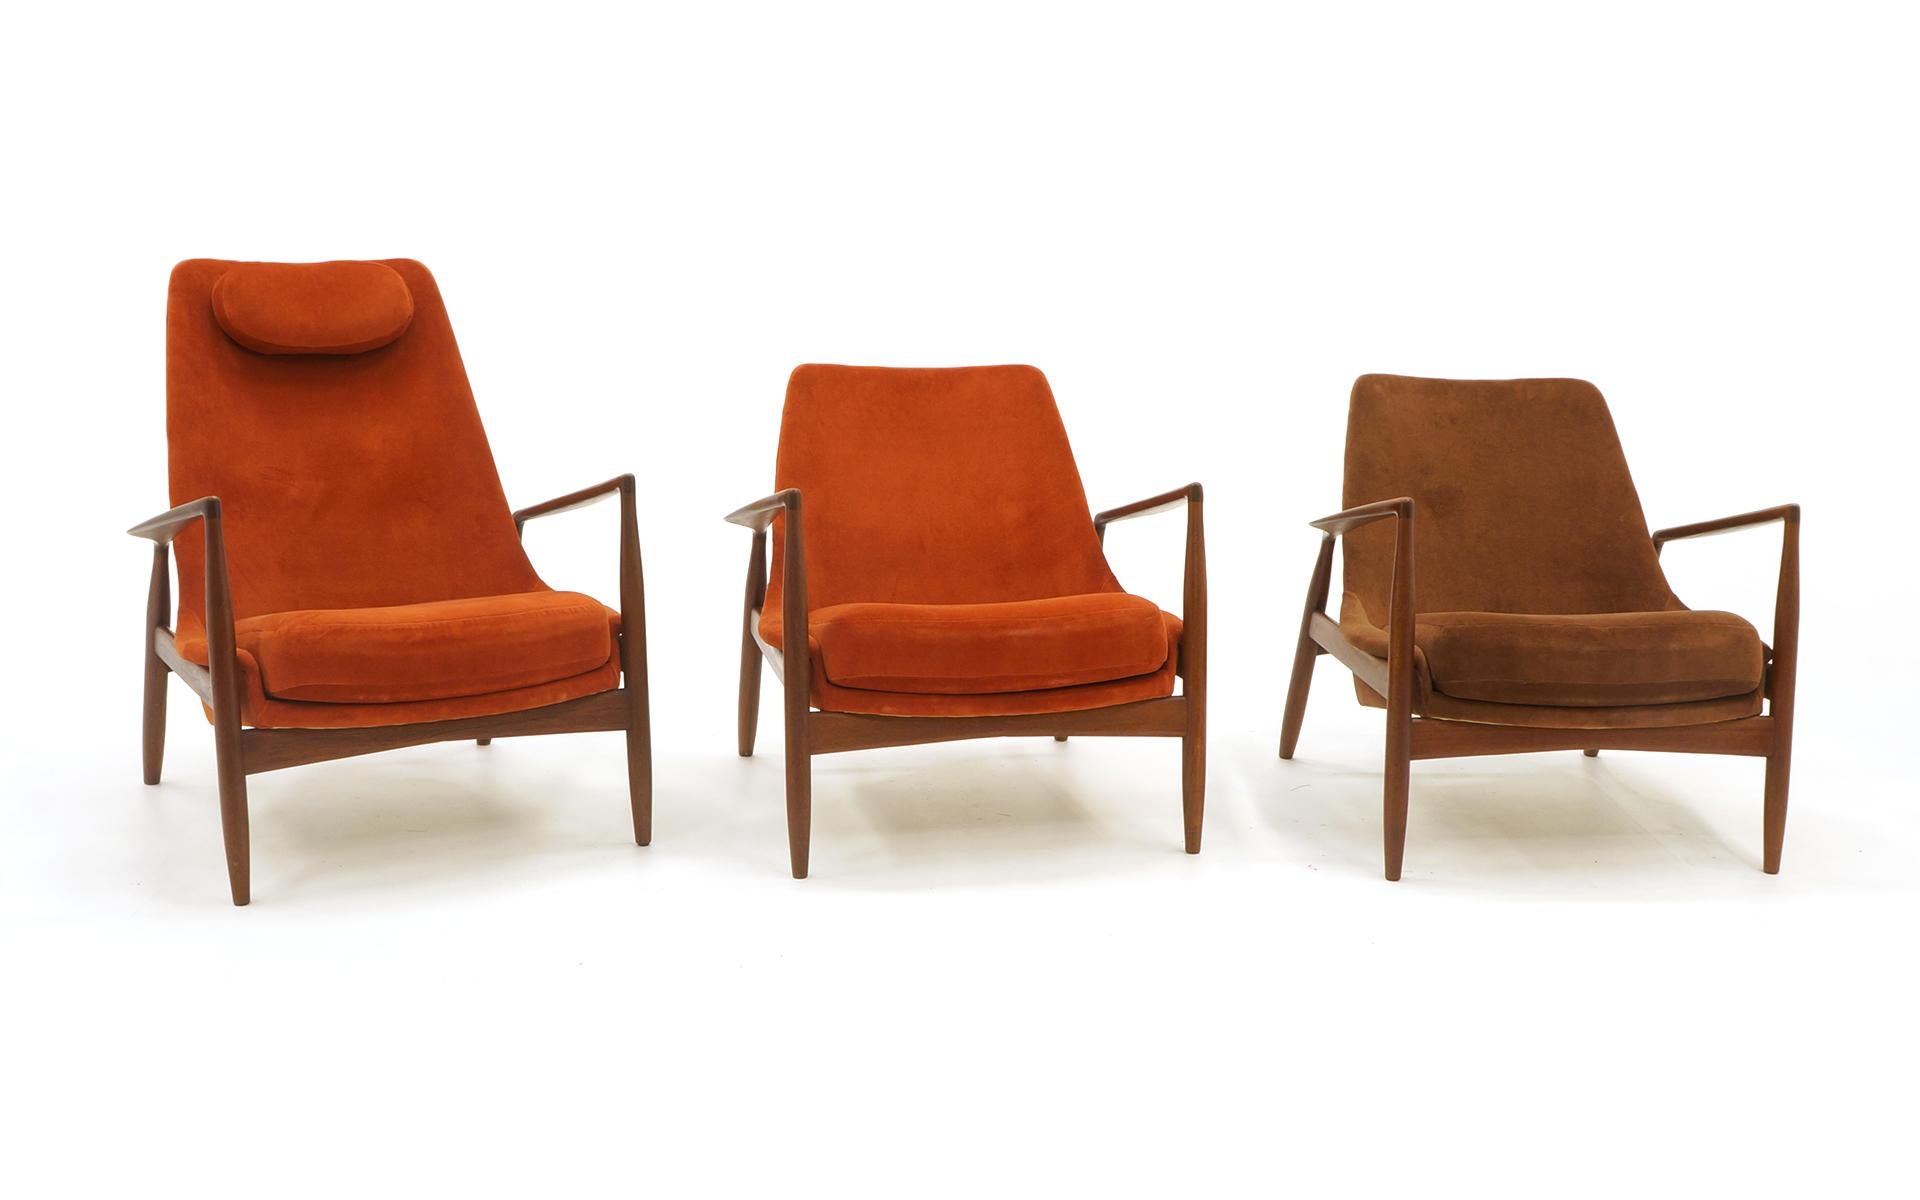 Rare pair of Kofod Larsen Seal chairs by OPE, Sweden, 1960s. One high back and one standard. Both have been recently reupholstered in a burnt orange velvet that feels like suede. Very good to excellent condition.